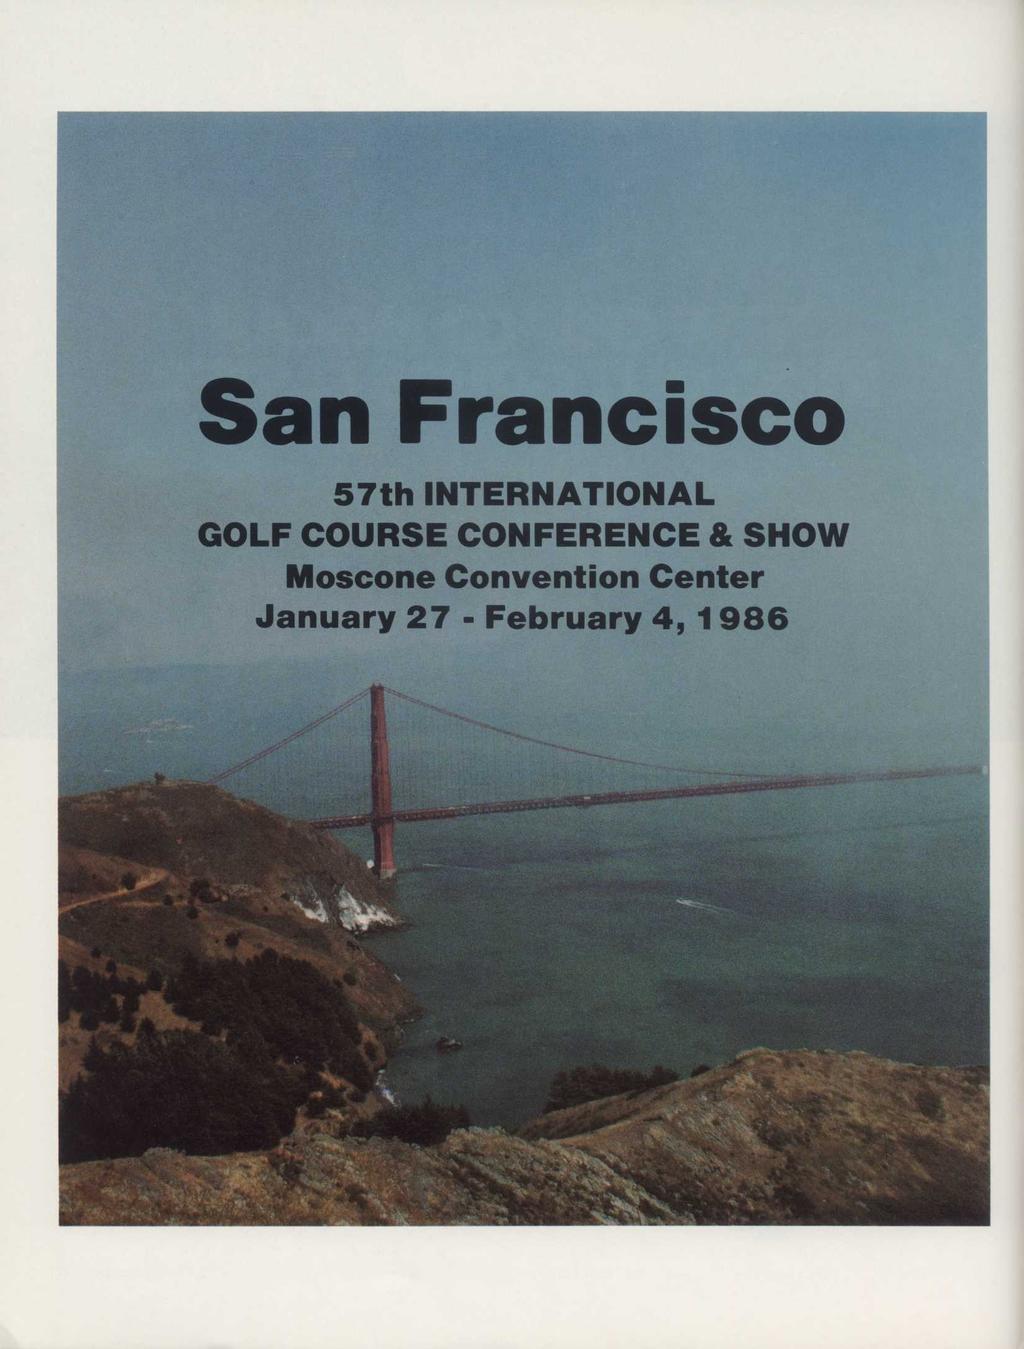 San Francisco 57th INTERNATIONAL GOLF COURSE CONFERENCE &